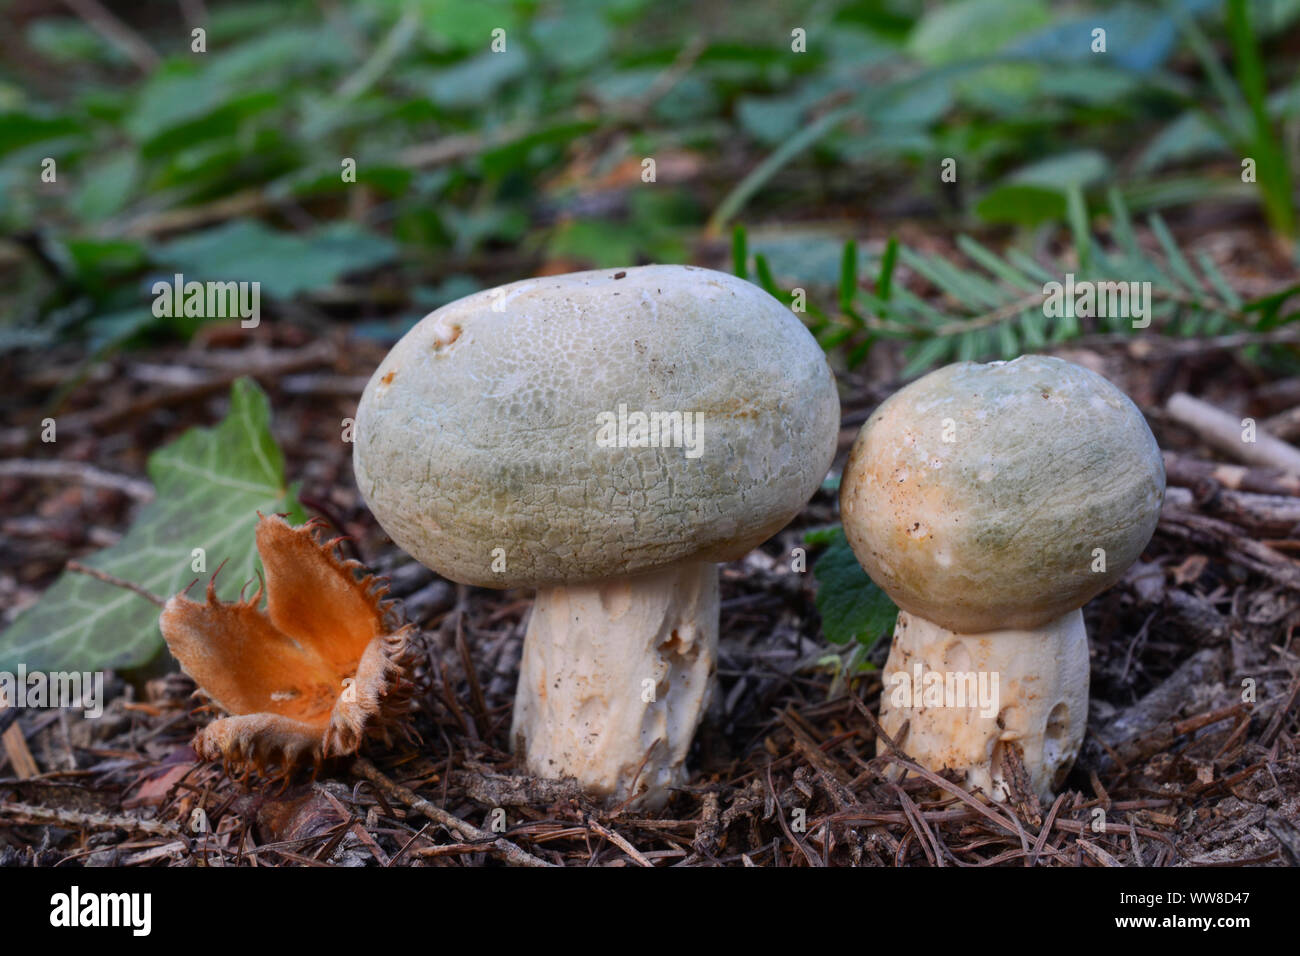 Two young specimen of delicious, edible Greencracked Brittlegill or Russula virescens wild mushrooms in natural habitat Stock Photo